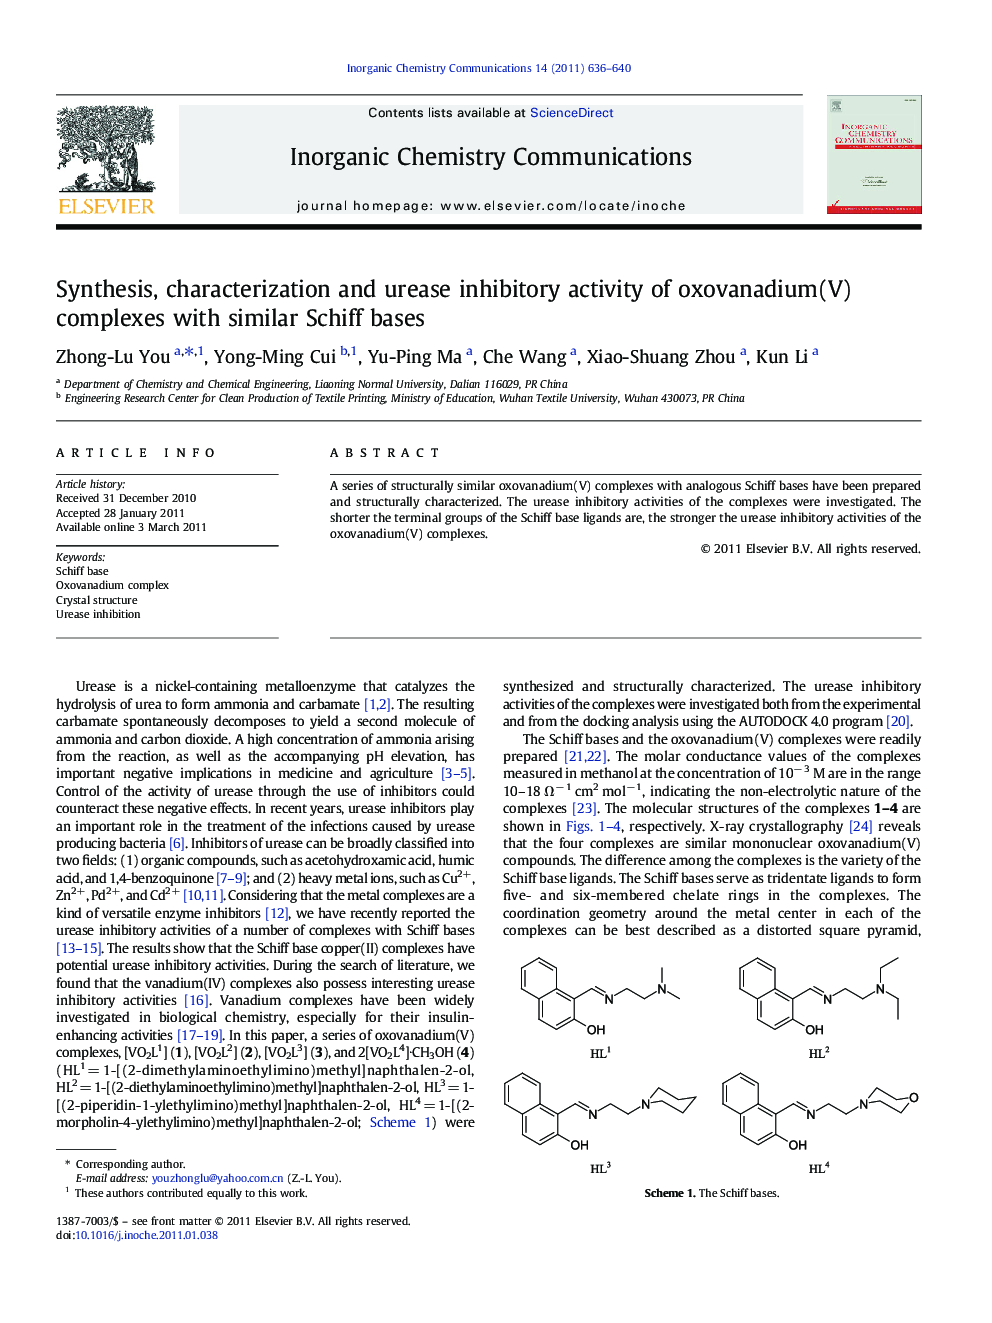 Synthesis, characterization and urease inhibitory activity of oxovanadium(V) complexes with similar Schiff bases